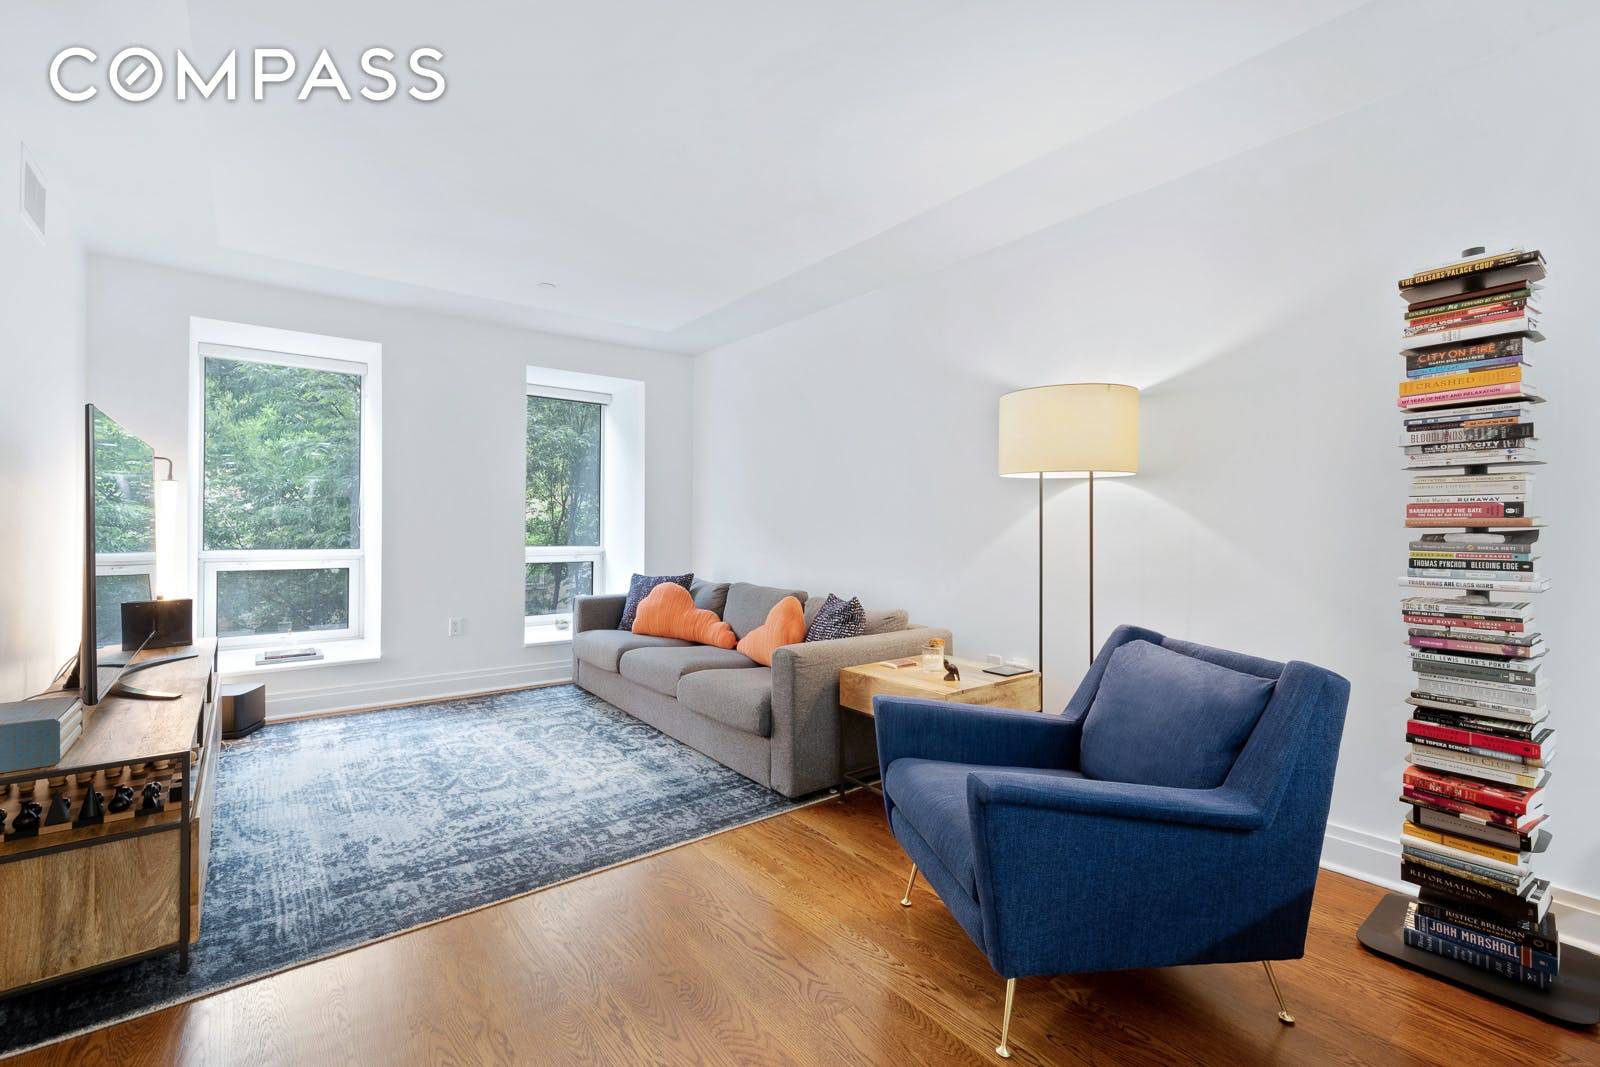 Fitzgerald condo large 1, 100 square foot flexible 2 bedroom and 2 full bath, located on a beautiful tree lined street in South Harlem.